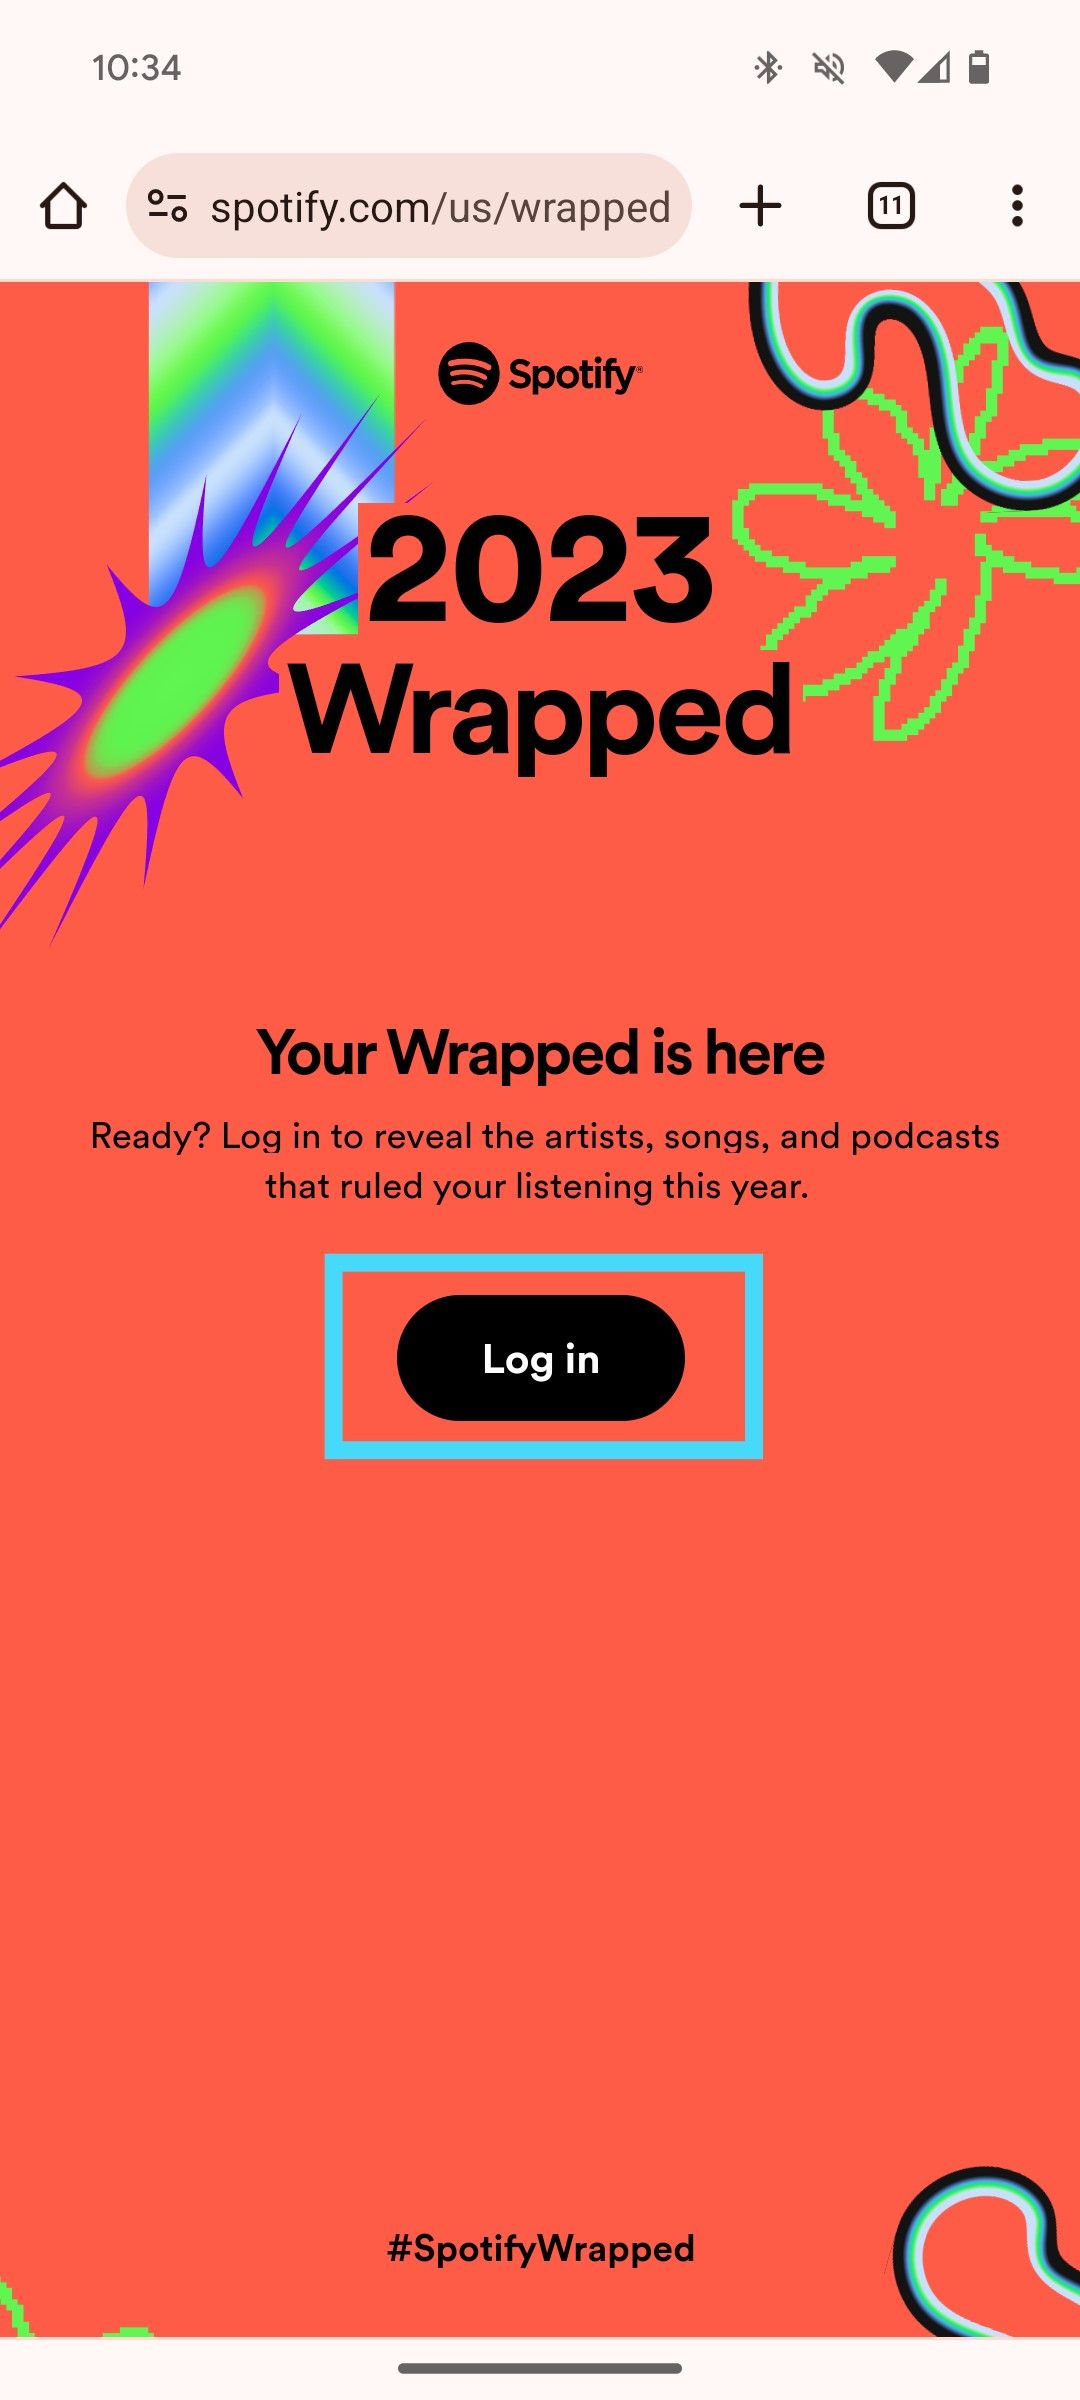 Spotify's 2023 Wrapped web interface with 'Log in' highlighted